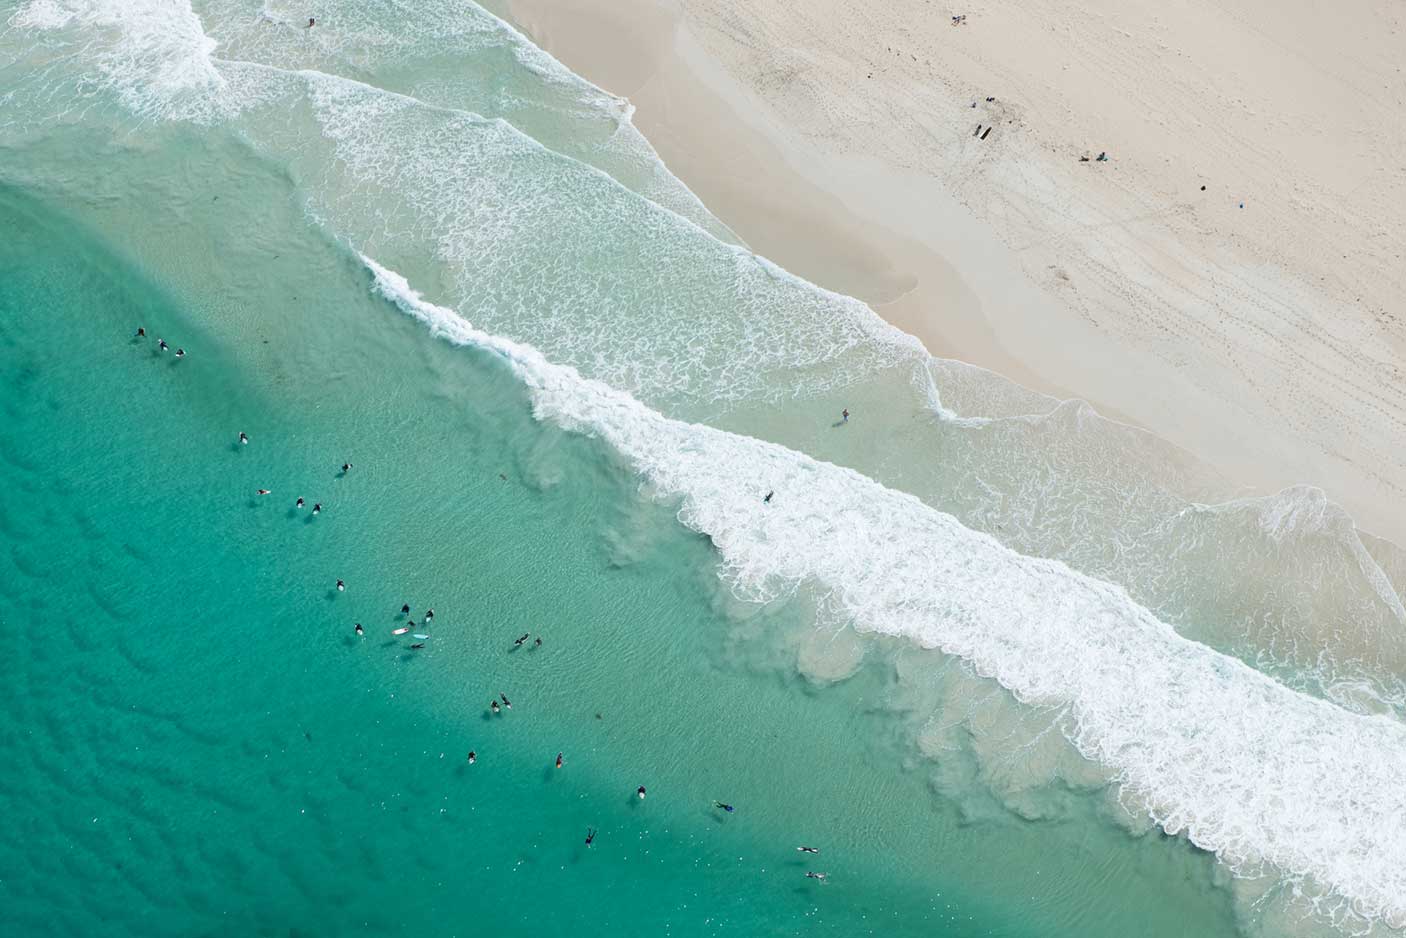 Surfers in the surf from above